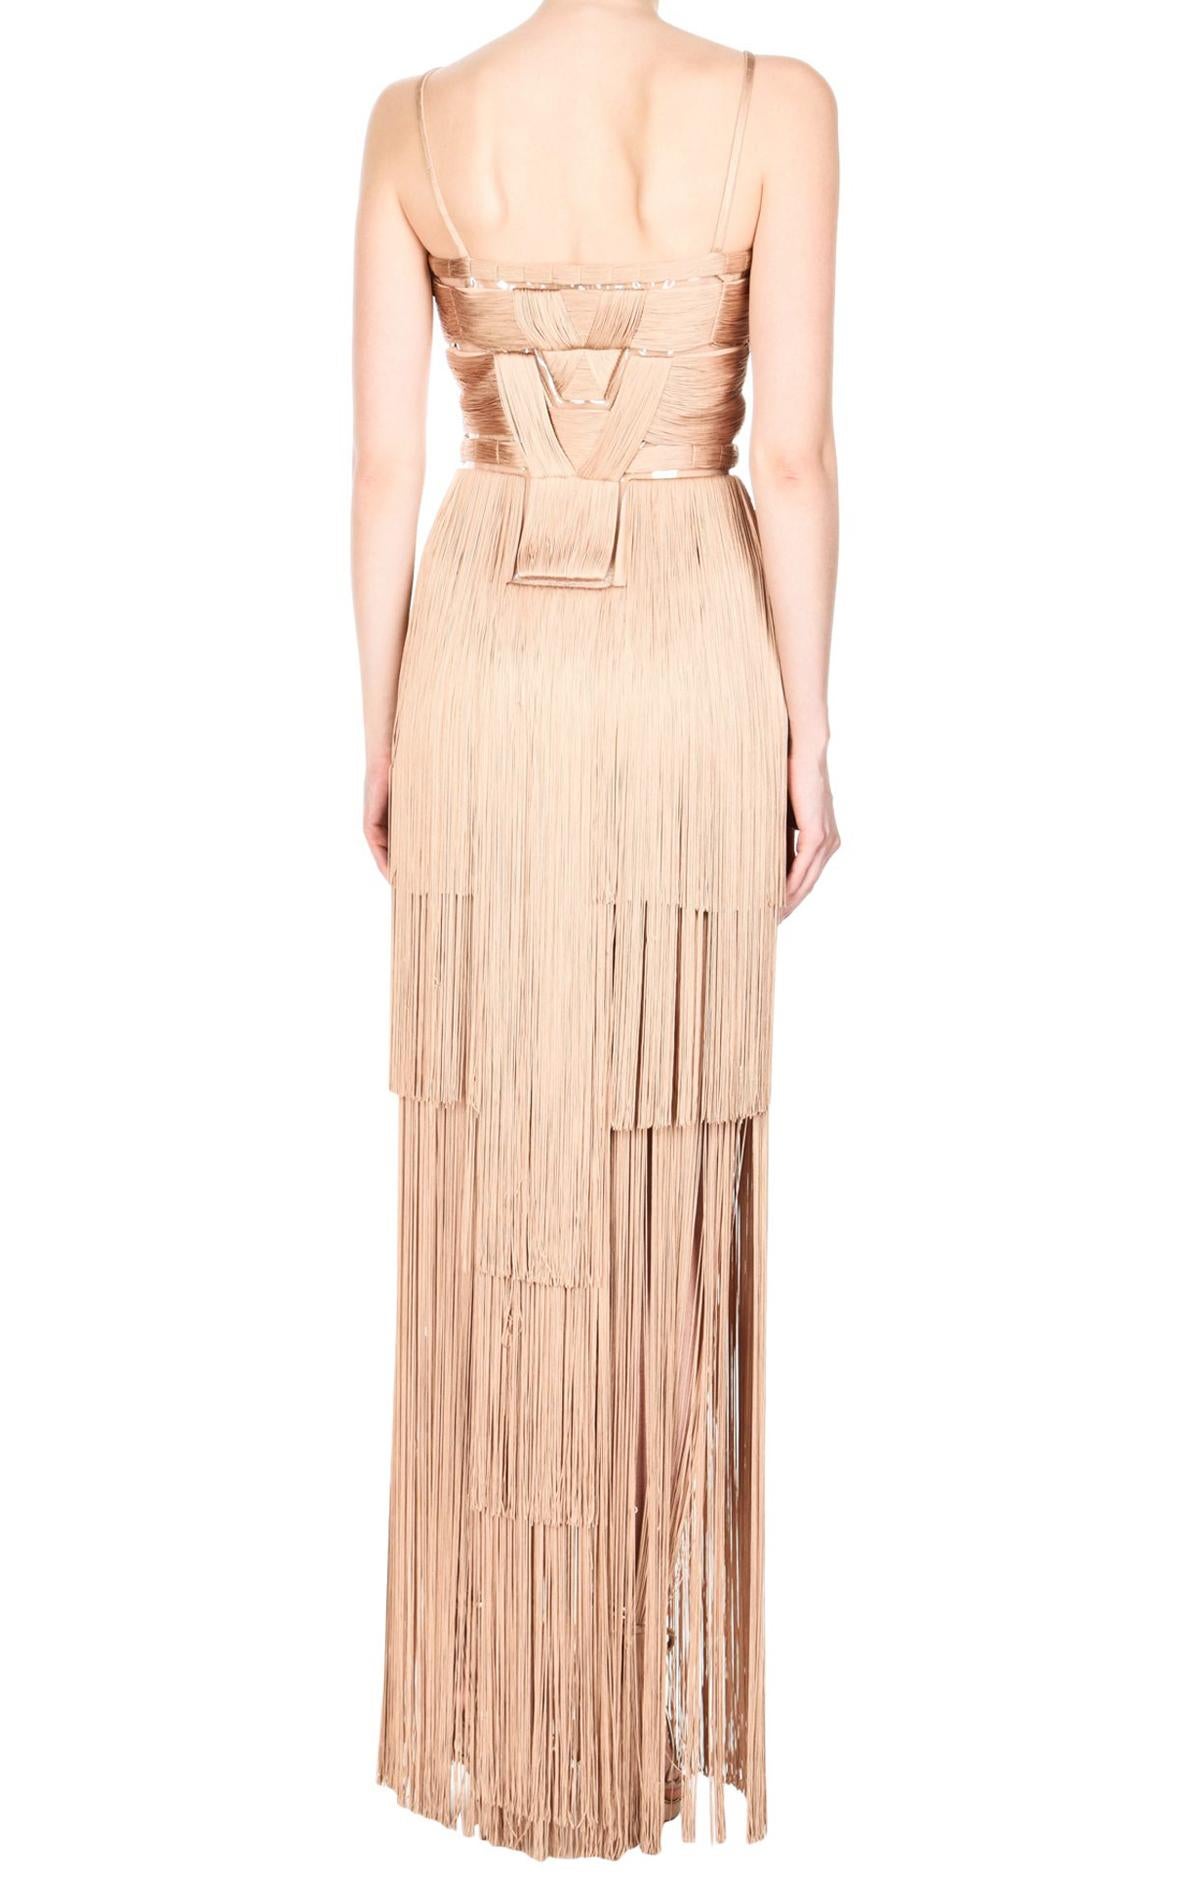 New Versace Nude Naked Spectacular Fringe Long Silk Corset Dress Gown It.  44 1